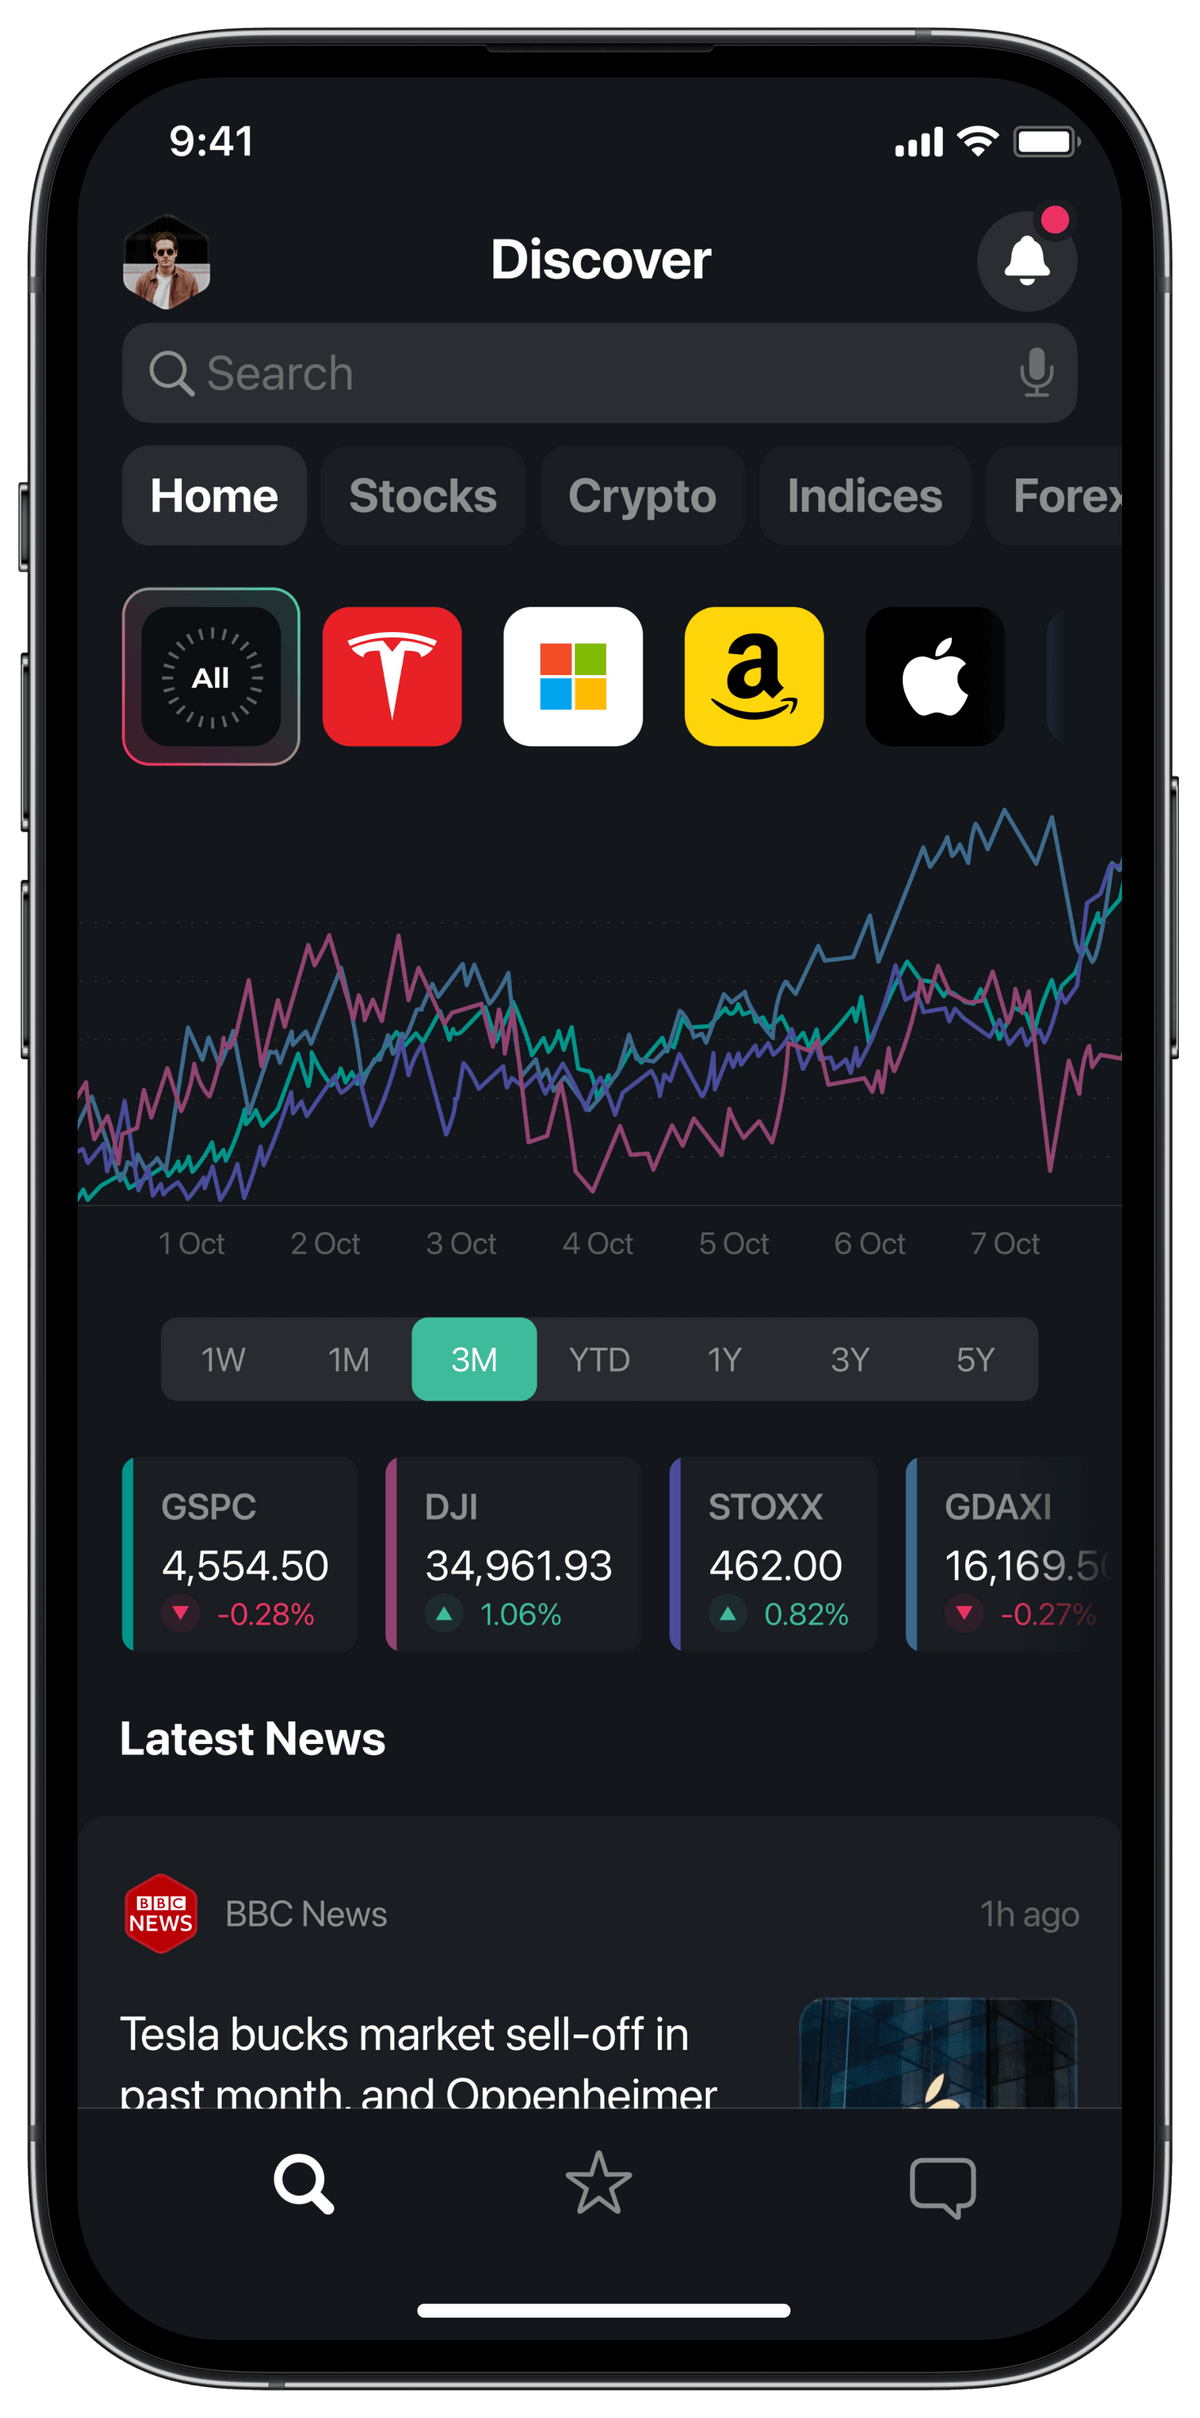 Stay on track with important market movements and top movers from your watchlist